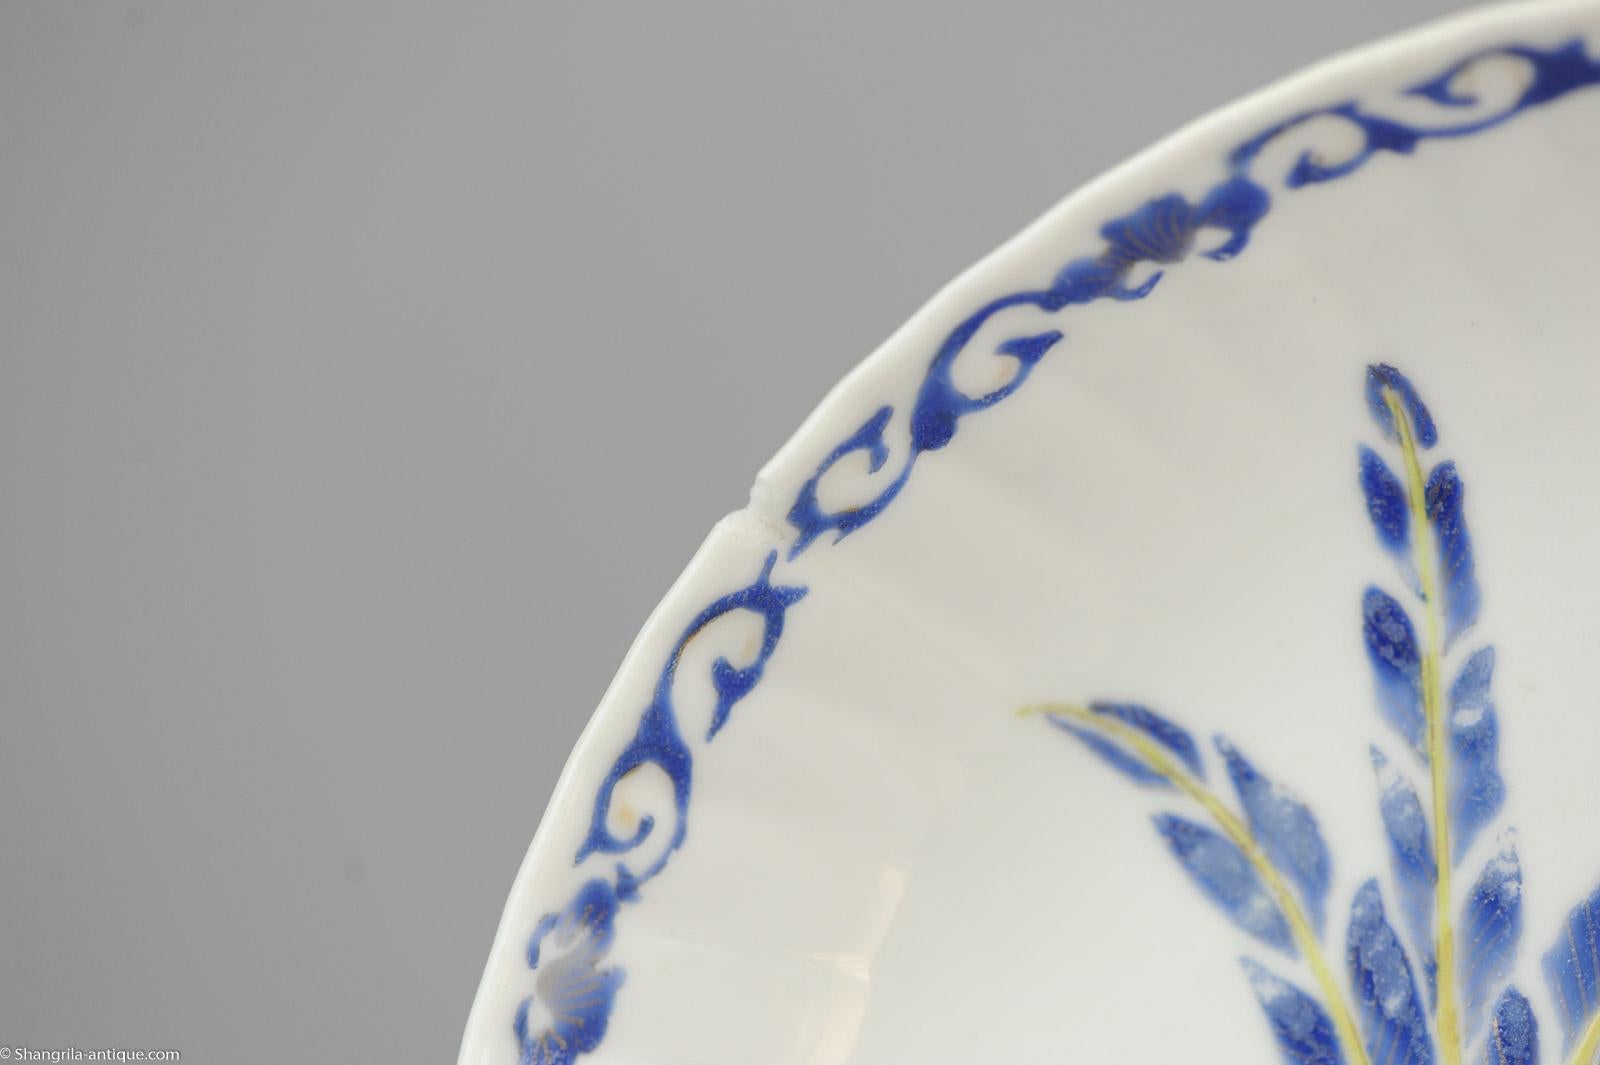 Great 18c flower/butterfly plate. larger size and deep. High quality painting.

Additional information:
Material: Porcelain & Pottery
Type: Plates
Region of Origin: China
Period: 18th century Qing (1661 - 1912)
Age: Pre-1800
Original/Reproduction: